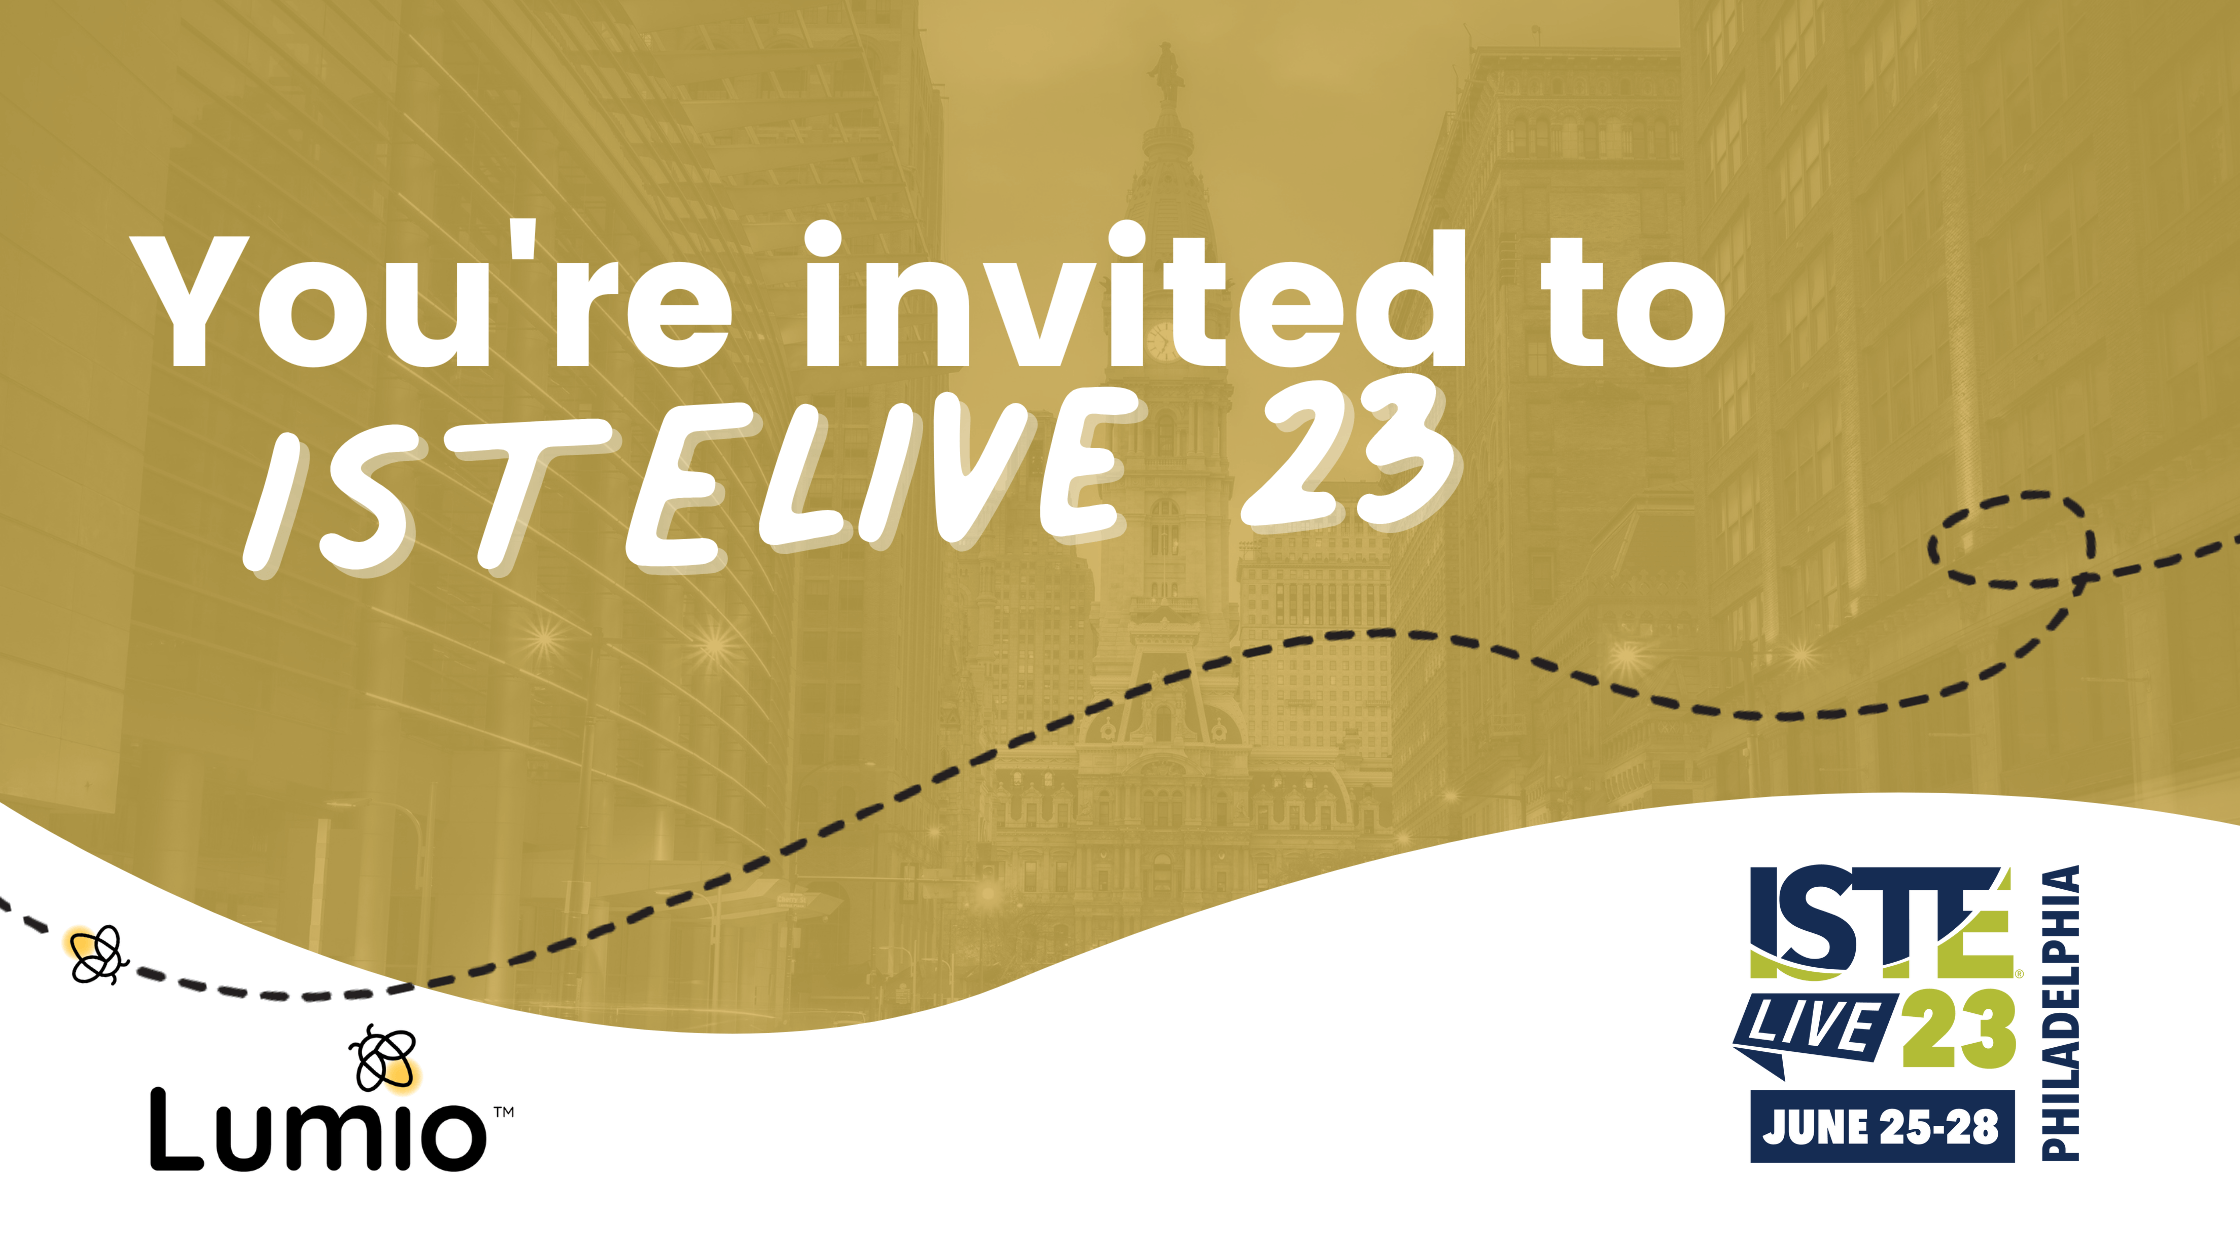 Image of Lumio event invitation for ISTE 2023, featuring the text 'You're invited to ISTELive 23!'